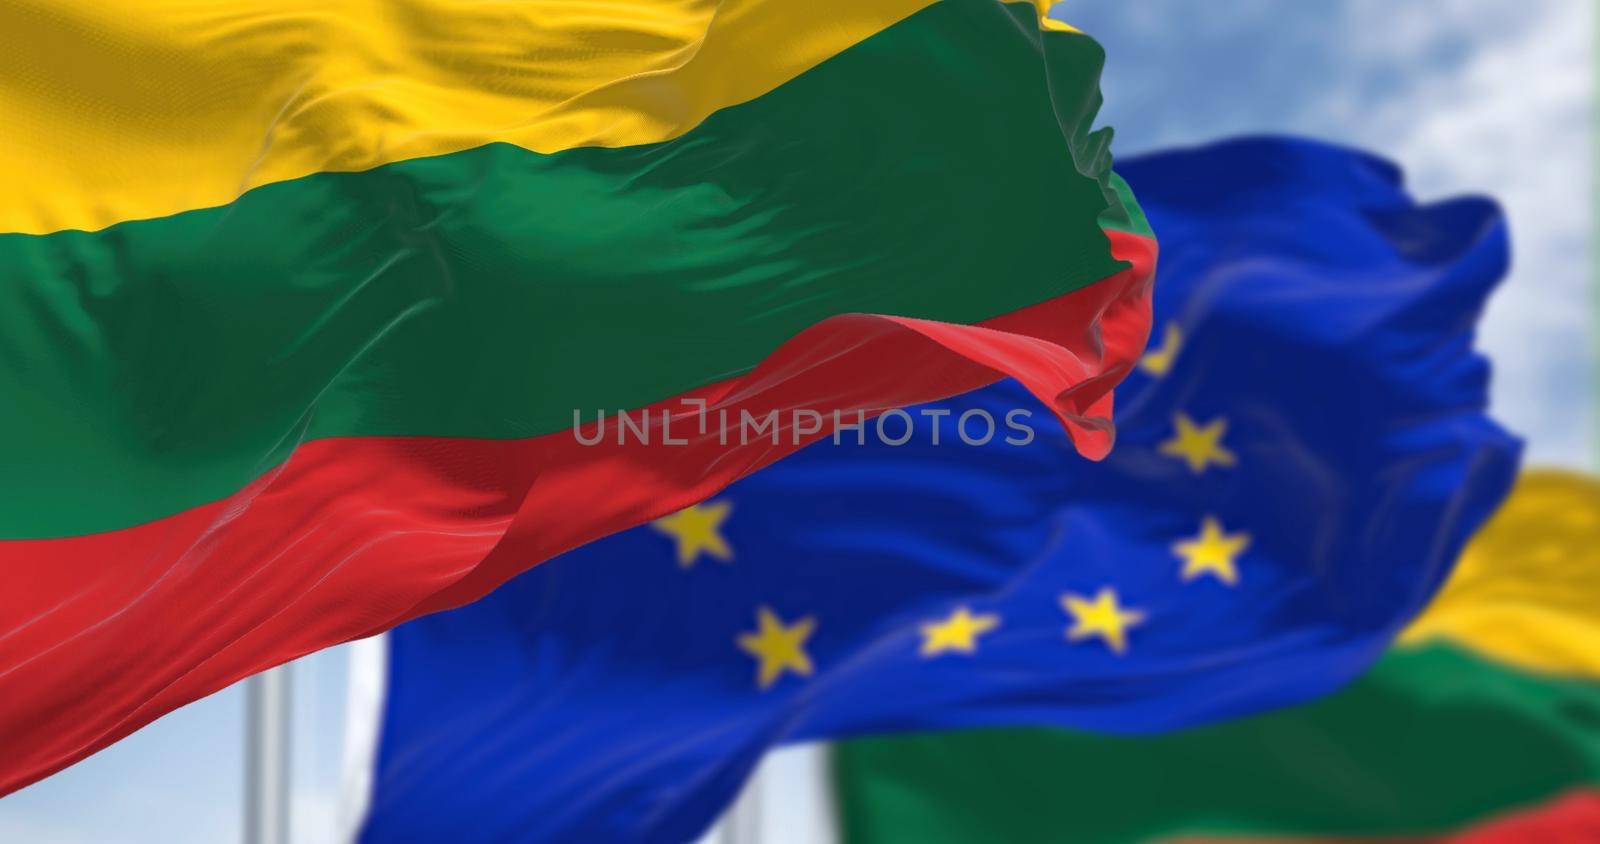 Detail of the national flag of Lithuania waving in the wind with blurred european union flag in the background by rarrarorro